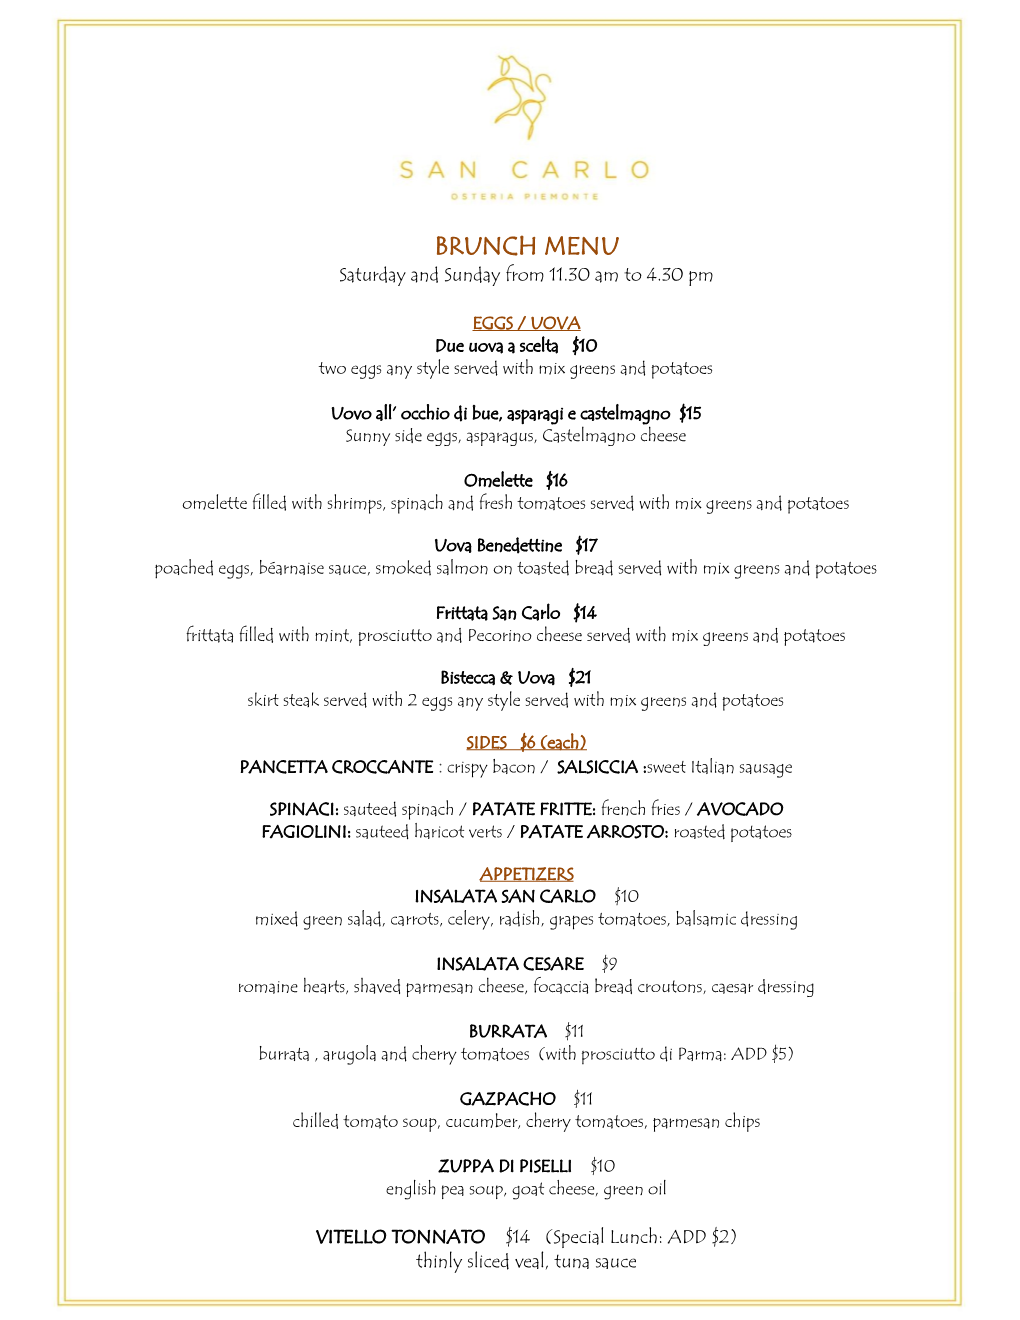 BRUNCH MENU Saturday and Sunday from 11.30 Am to 4.30 Pm